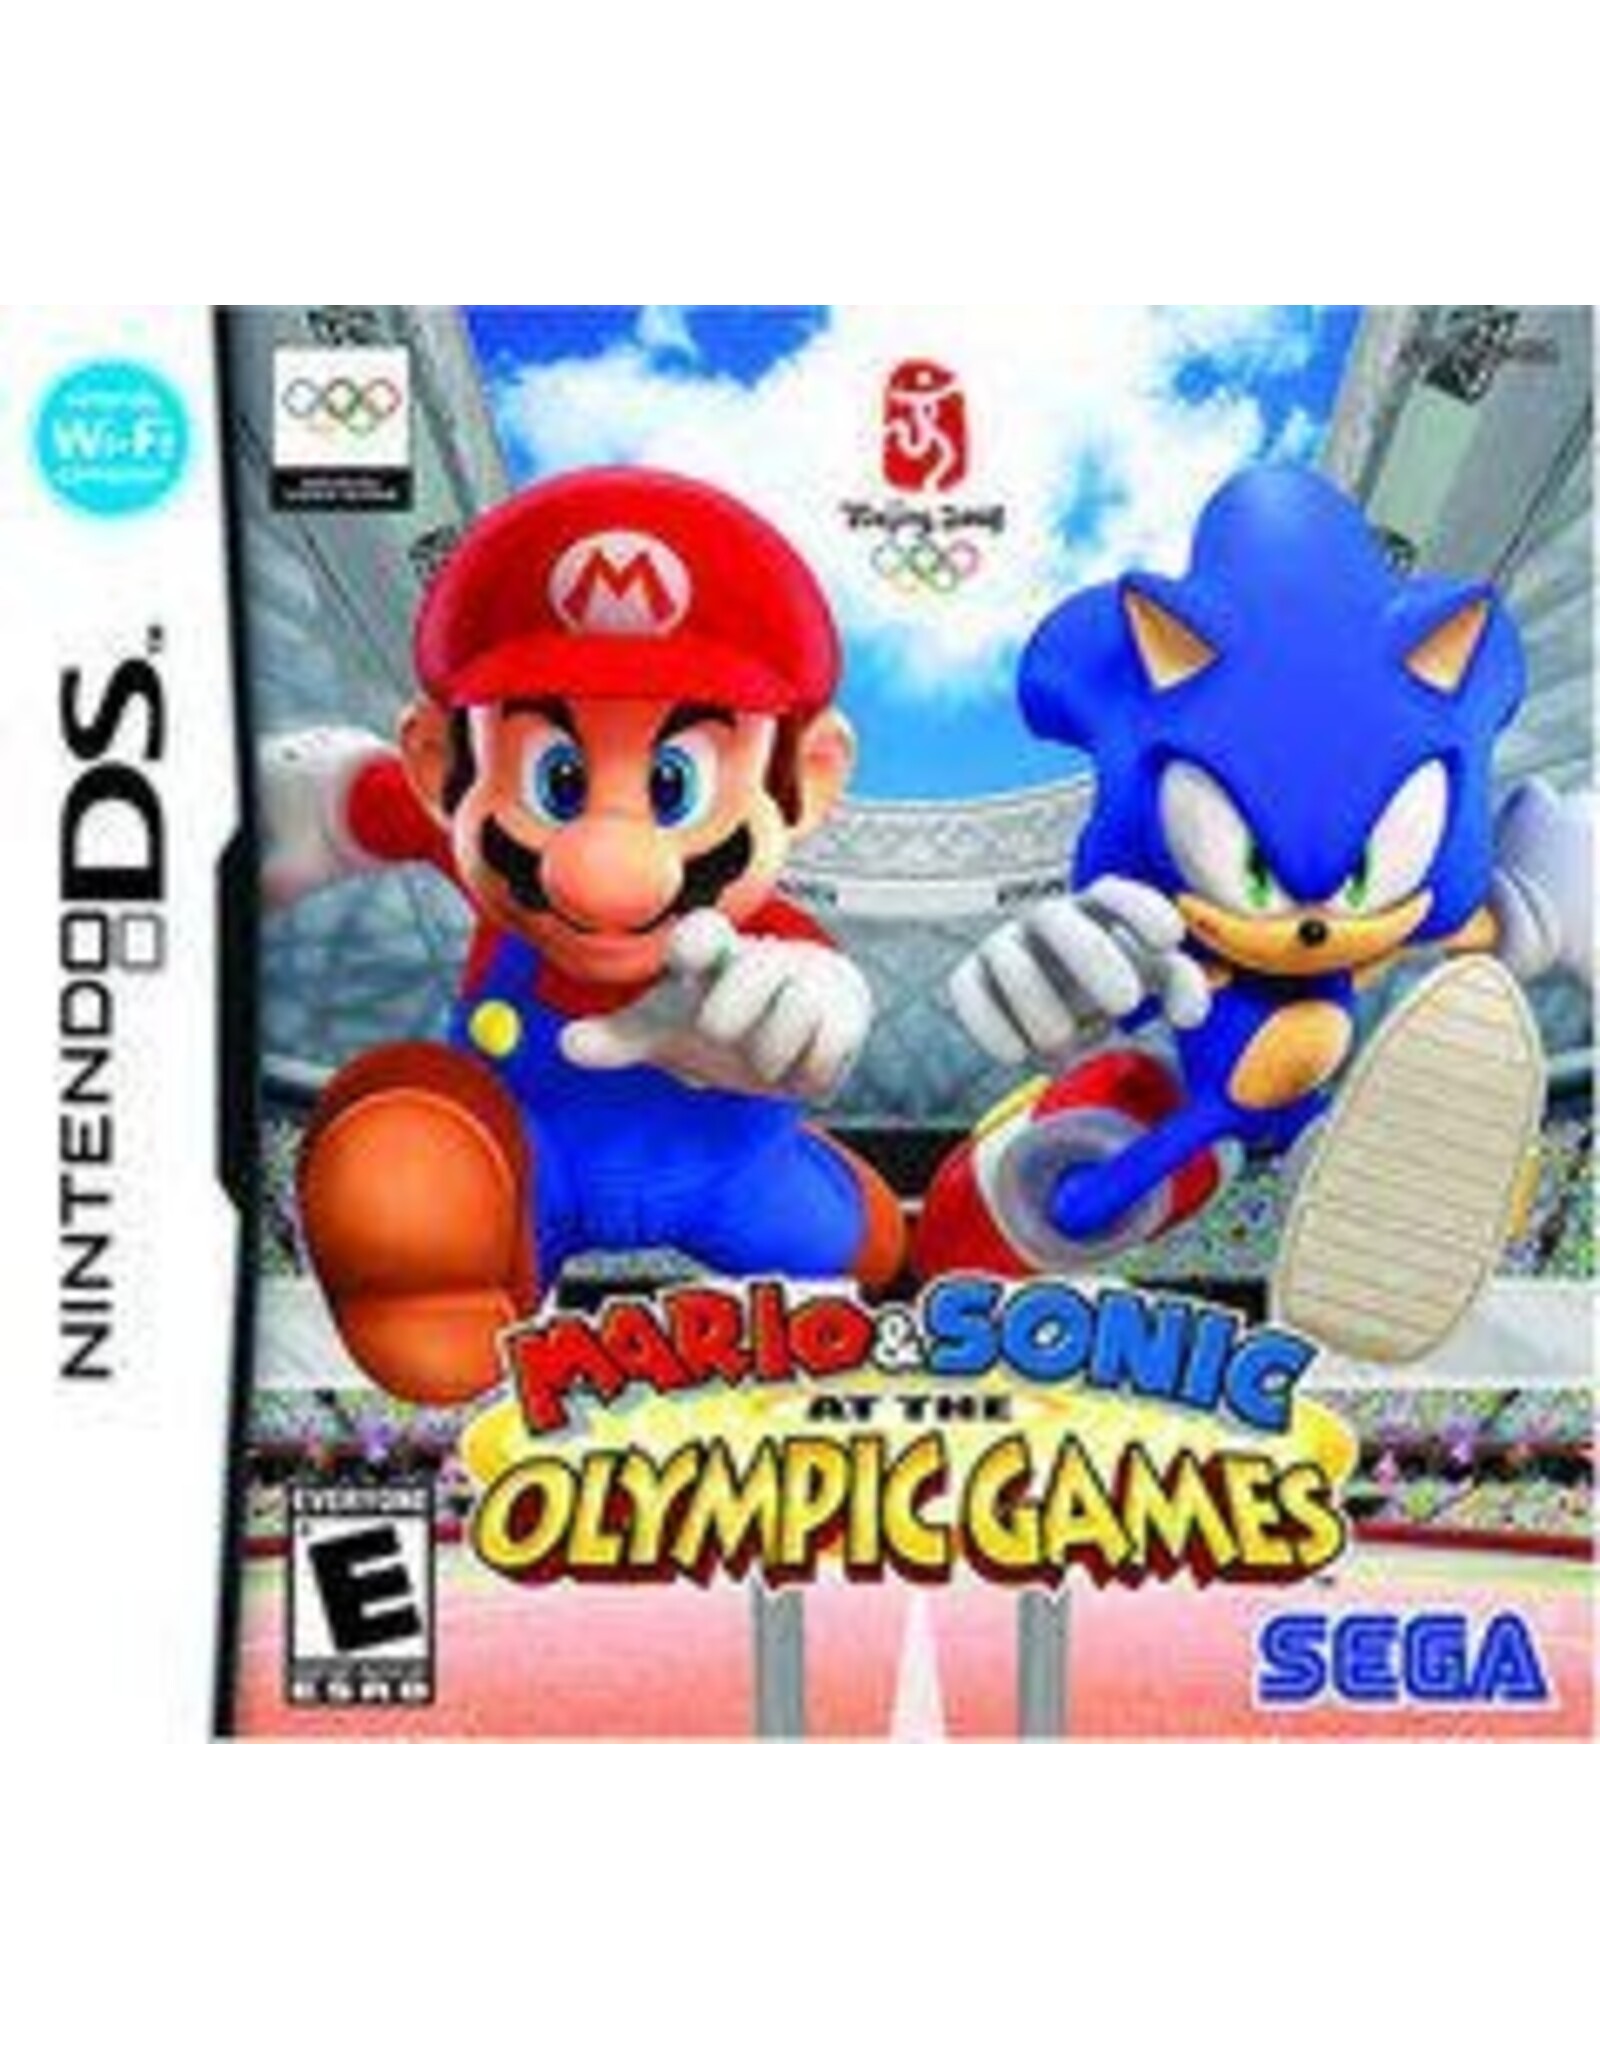 Nintendo DS Mario and Sonic at the Olympic Games (Used)